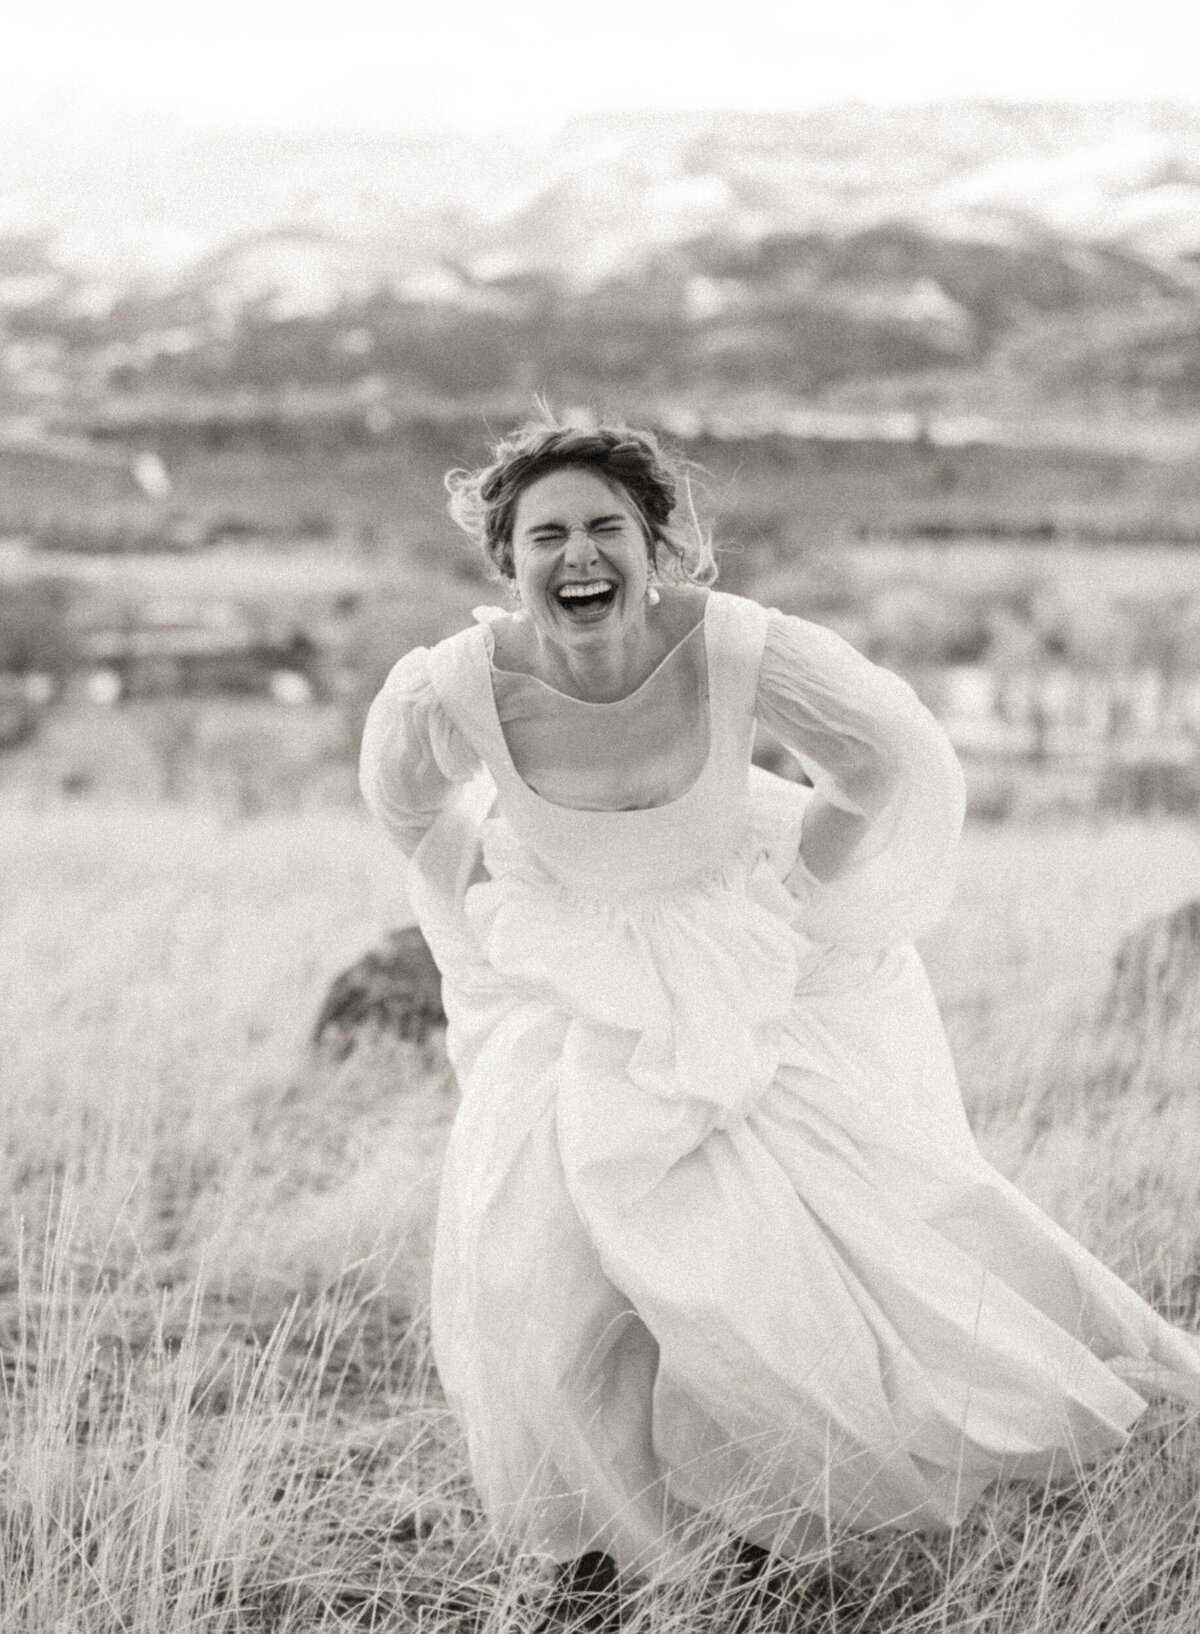 Whimsical bride in flowy wedding dress running and laughing with mountains in the background